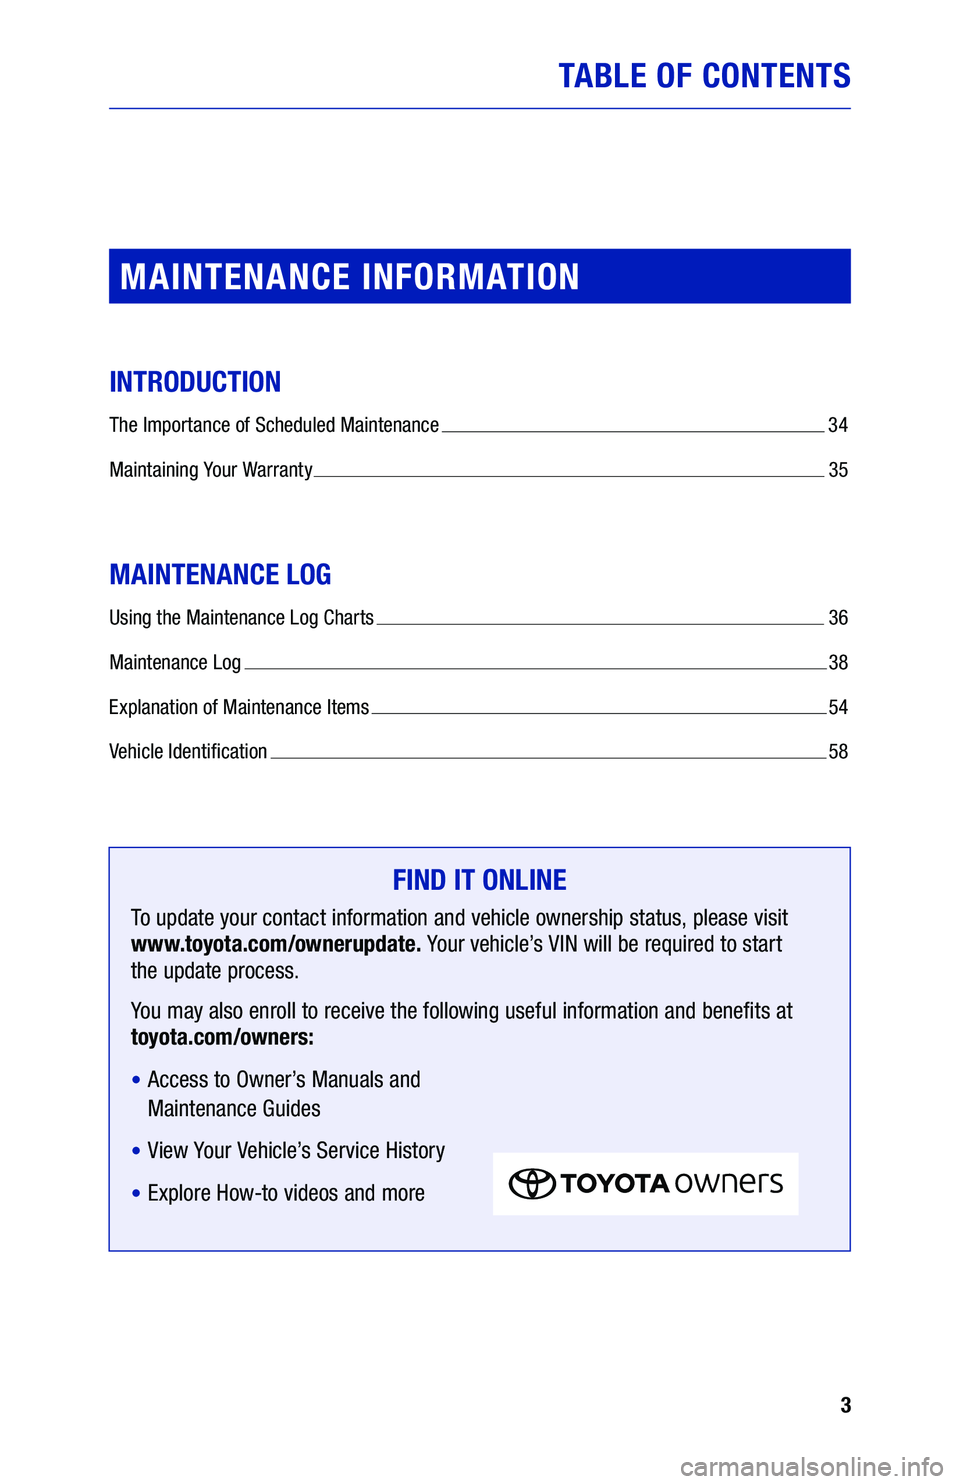 TOYOTA HIGHLANDER HYBRID 2019  Warranties & Maintenance Guides (in English) 3
TABLE OF CONTENTS
MAINTENANCE INFORMATION
INTRODUCTION
The Importance of Scheduled Maintenance  34
Maintaining Your Warranty 
  35
MAINTENANCE LOG
Using the Maintenance Log Charts  36
Maintenance Lo